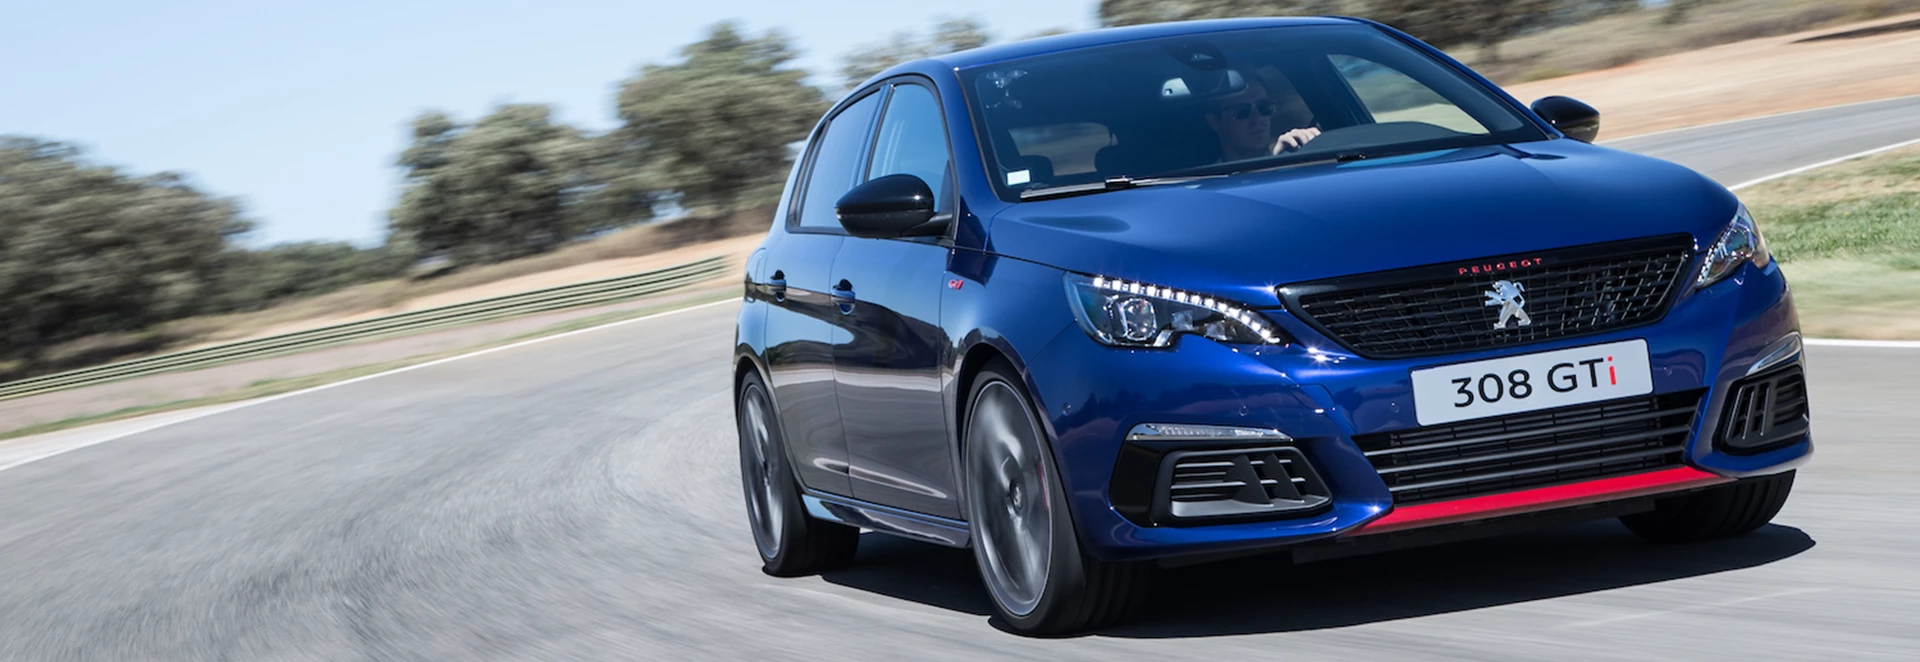 New Peugeot 308 GTI review 